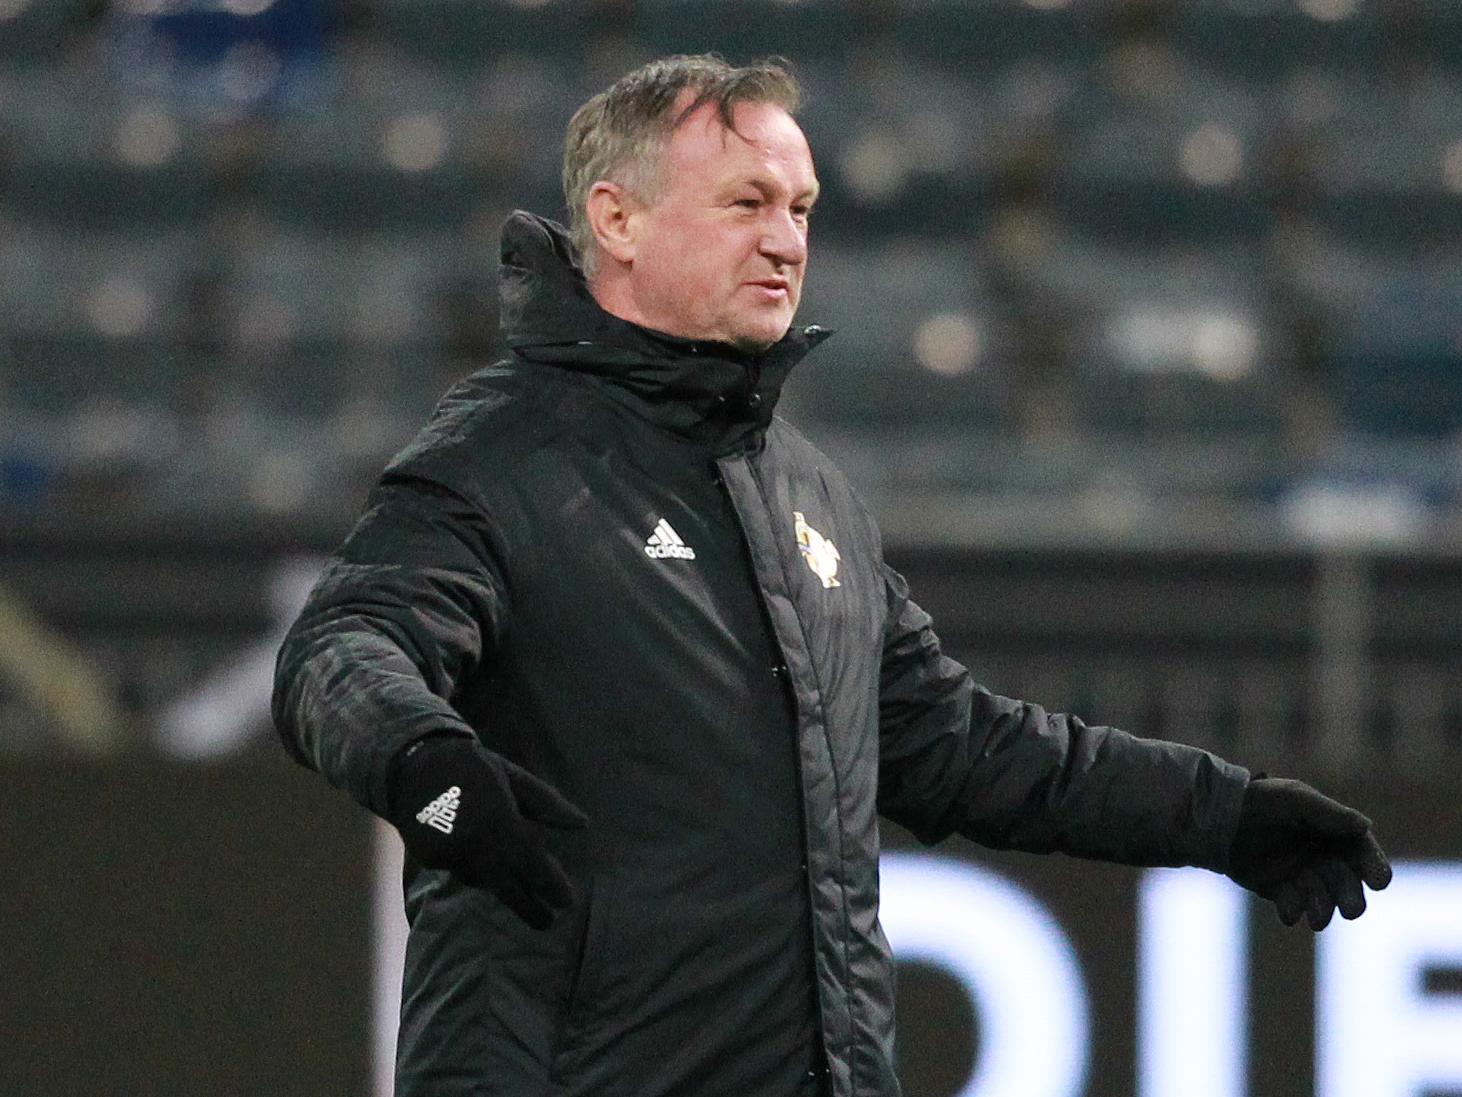 Northern Ireland manager Michael O'Neill has played down concerns that he could struggle managing both Stoke City and a national team, branding the task as "dead easy" (BBC Football)